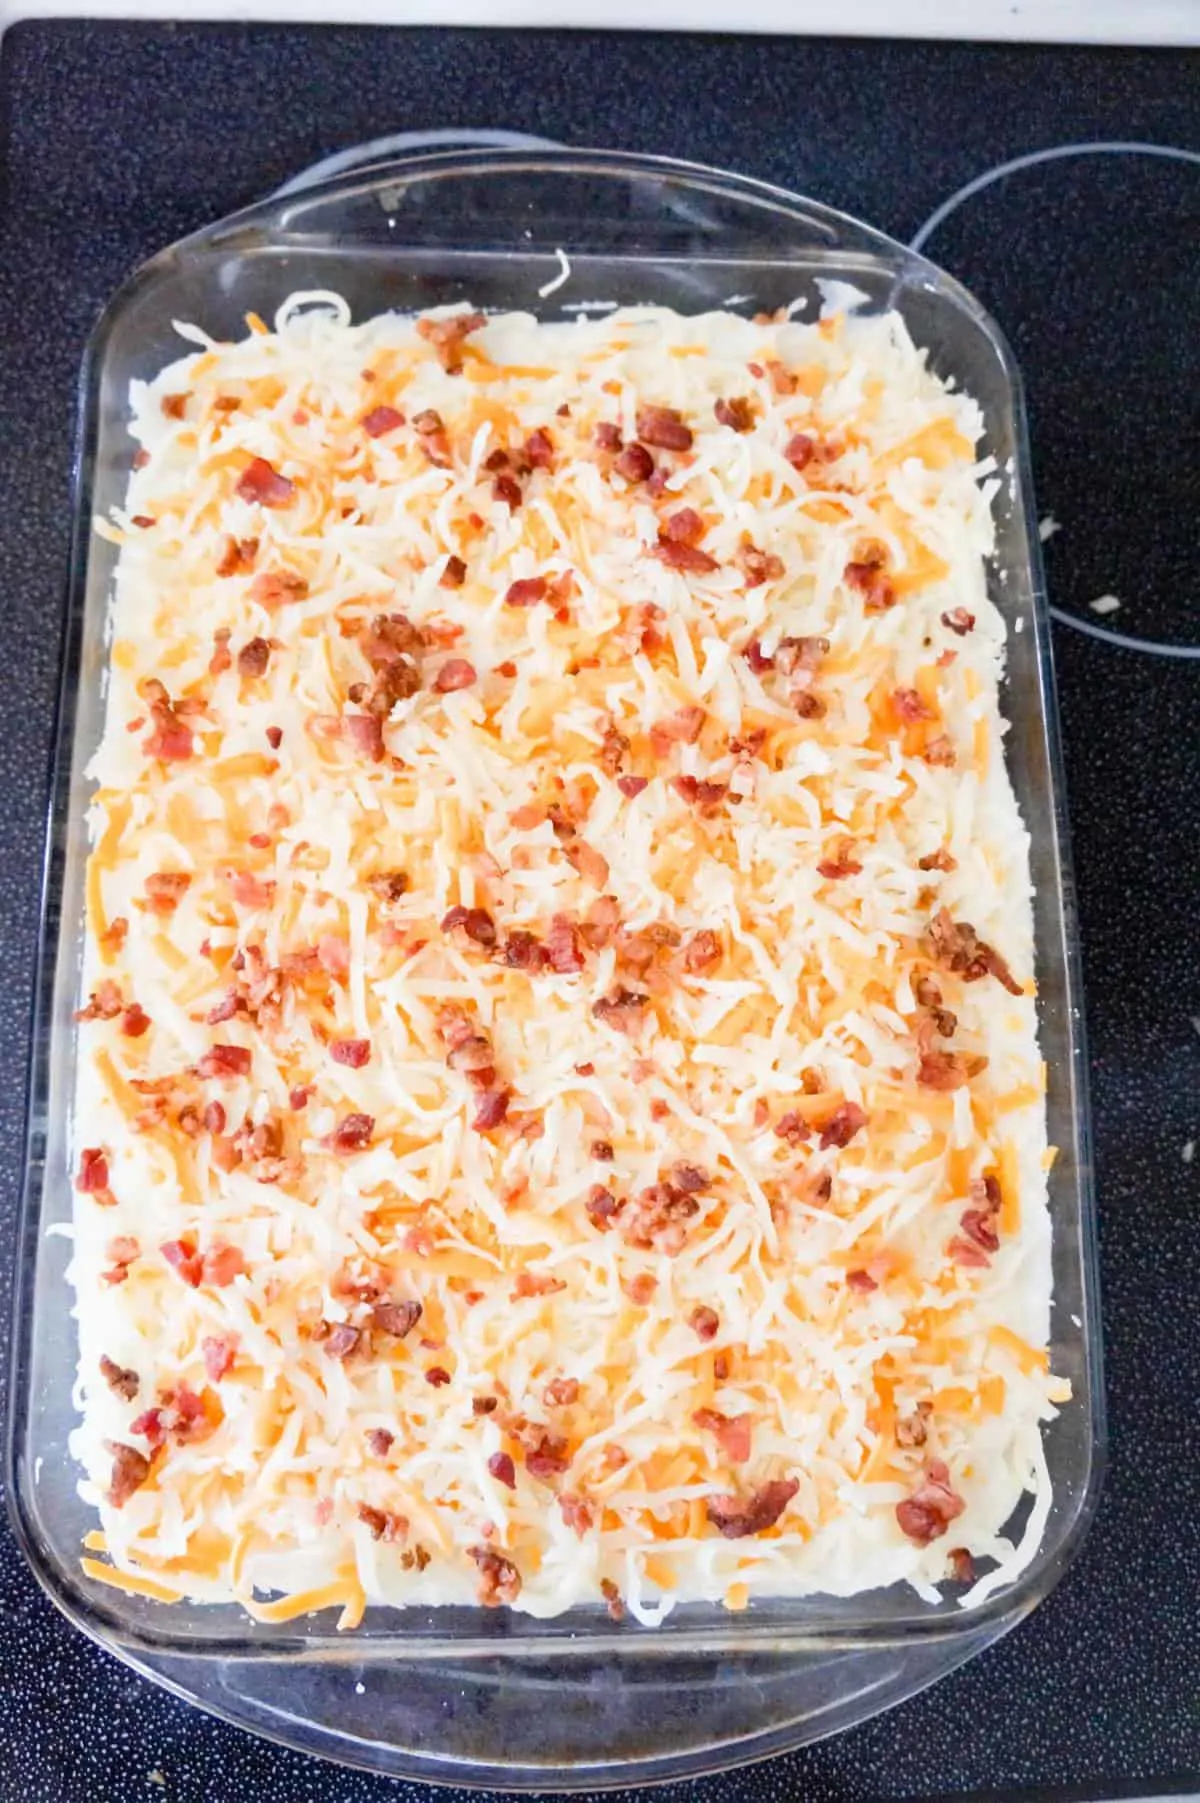 crumbled bacon and shredded cheese on top of shepherd's pie before baking